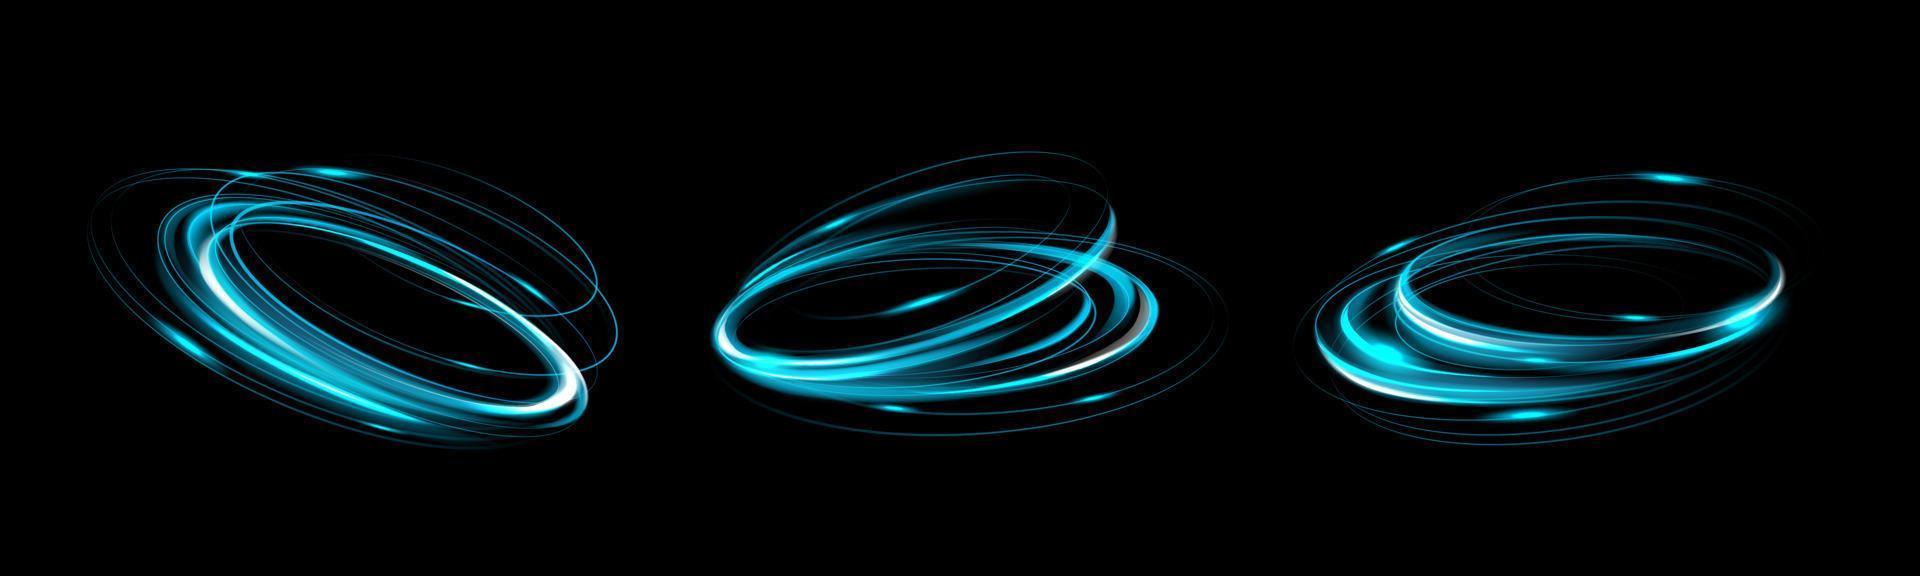 Glowing blue circles realistic set on black vector